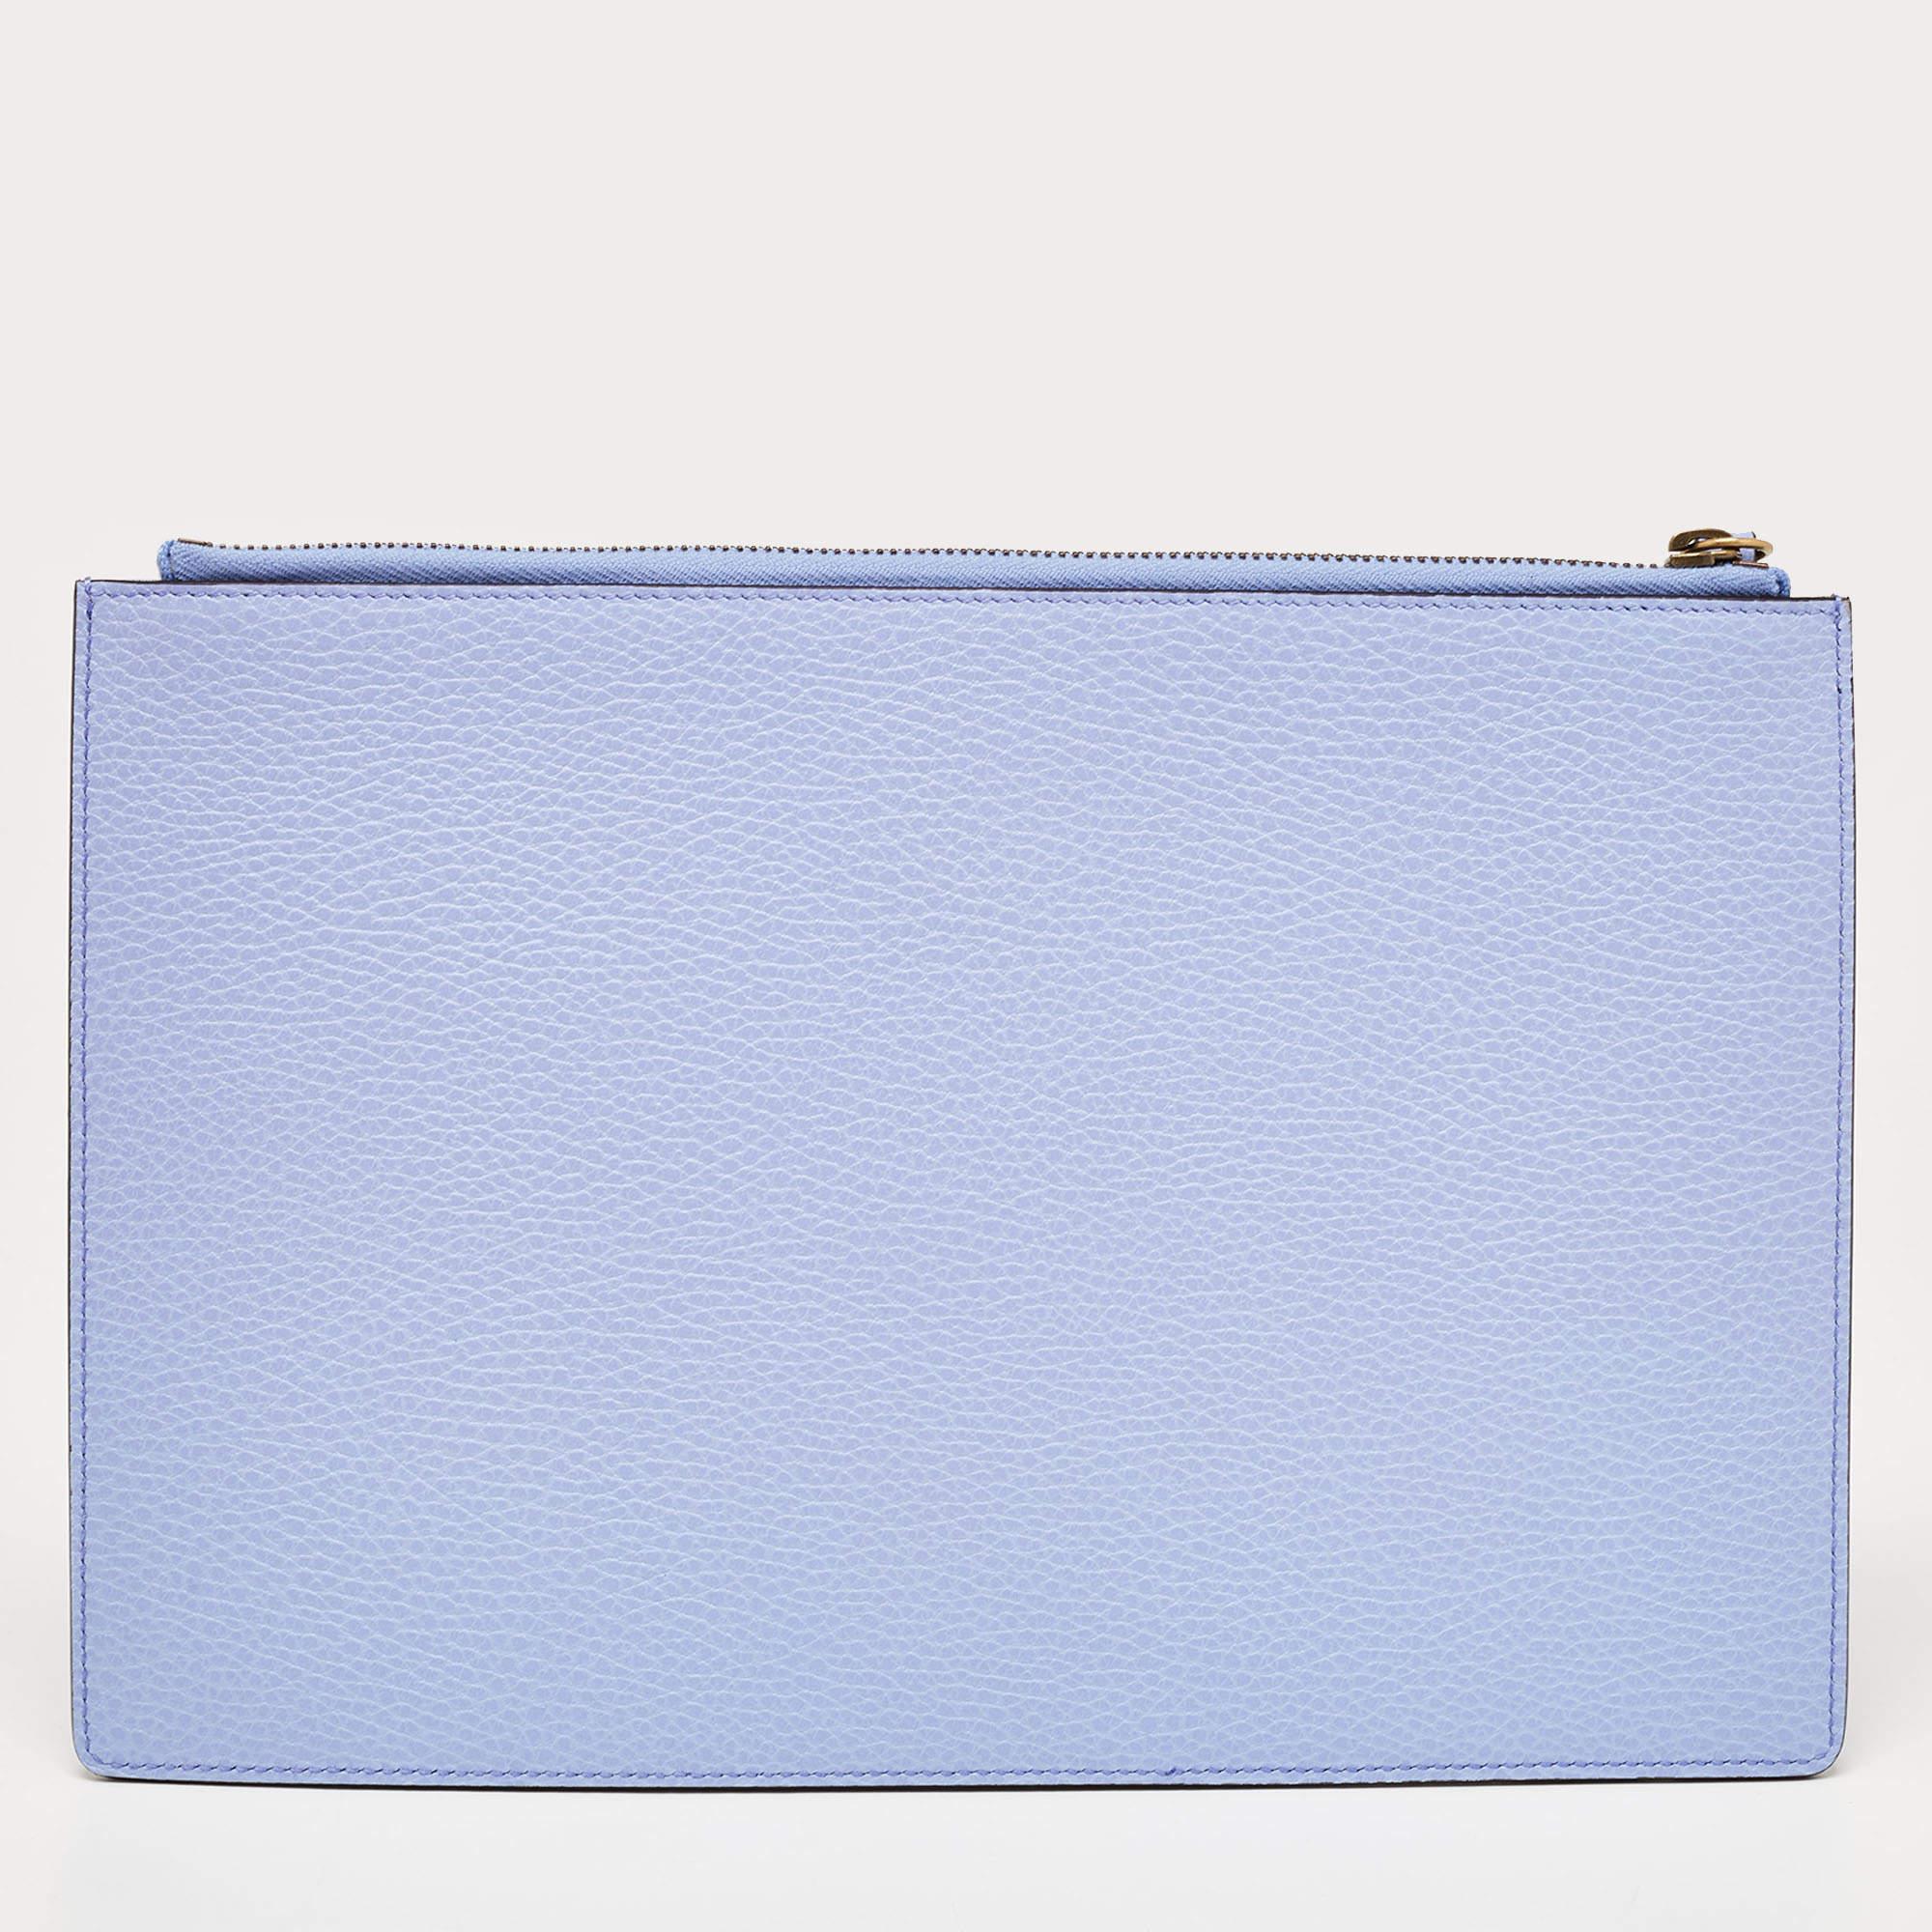 The Gucci clutch exudes elegance with its soft lavender hue and luxurious leather construction. It features a sleek, slim design perfect for carrying essentials. The charming cat motif adds a whimsical touch, making it a delightful accessory for any